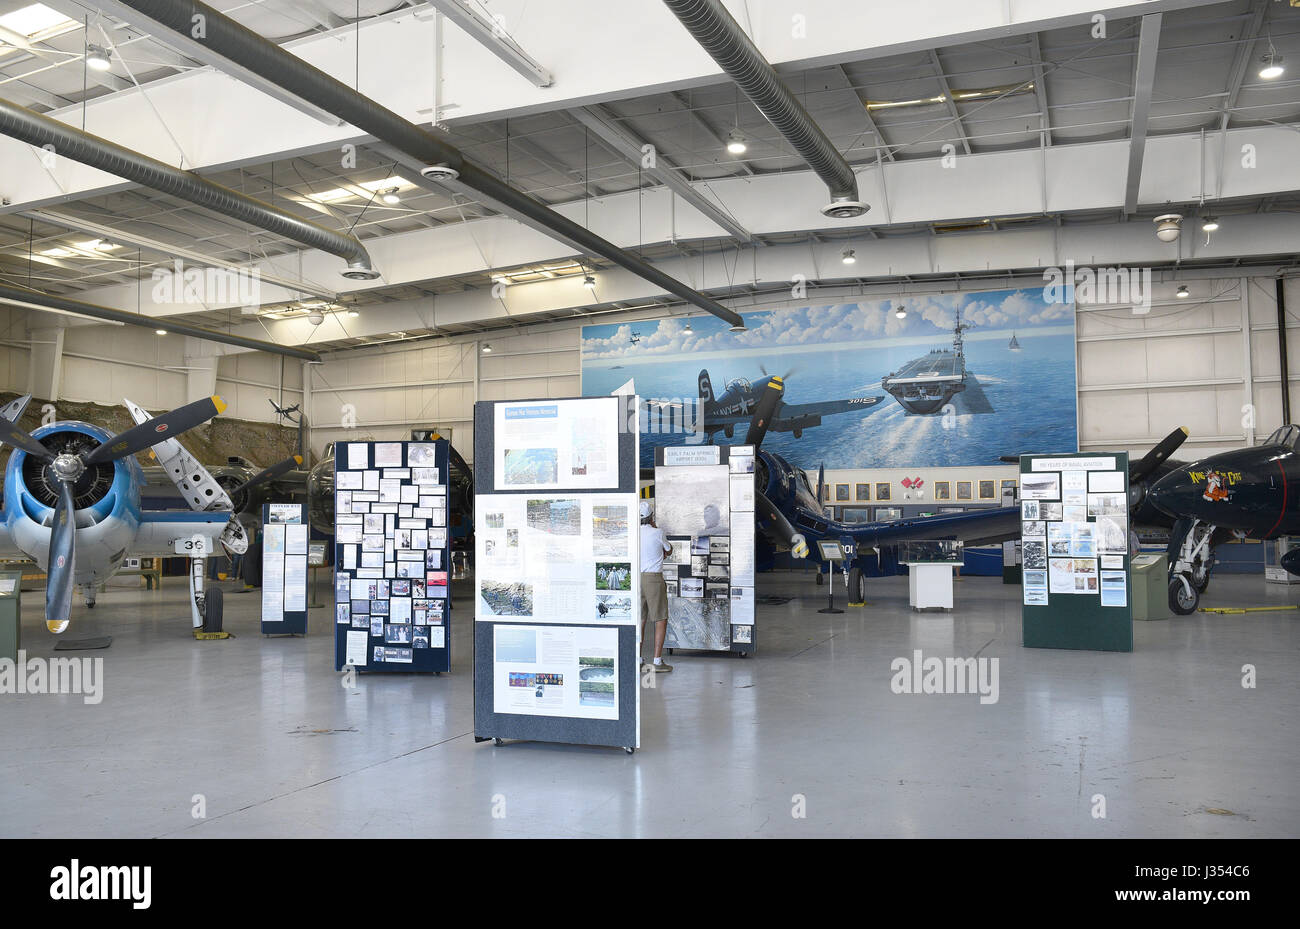 PALM SPRINGS, CA - MARCH 24, 2017: Palm Springs Air Museum, Hangar exhibits with vintage plane at the Palm Springs Air Museum. Stock Photo